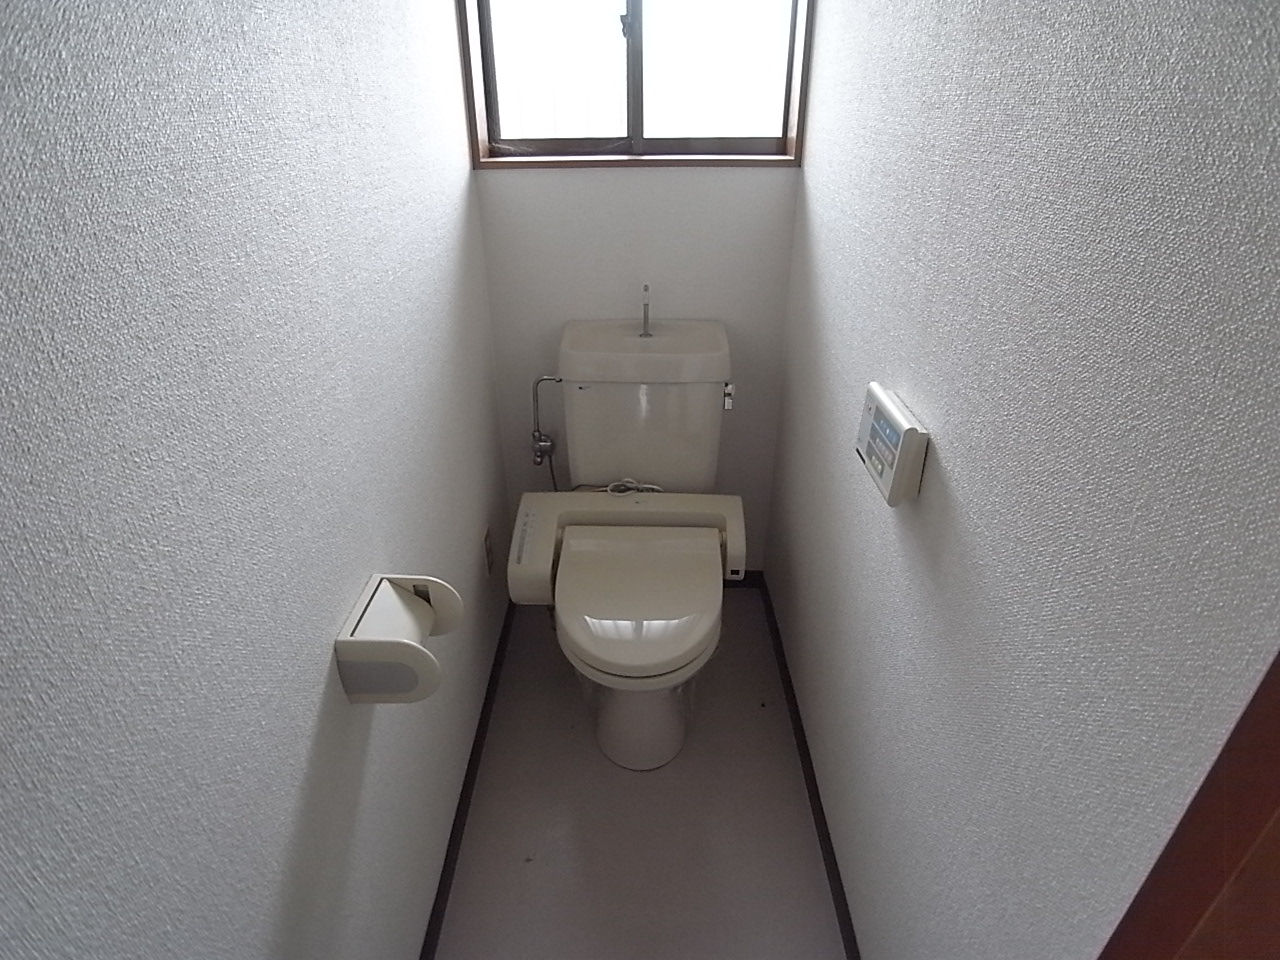 Toilet. It is a window is glad the toilet ^^